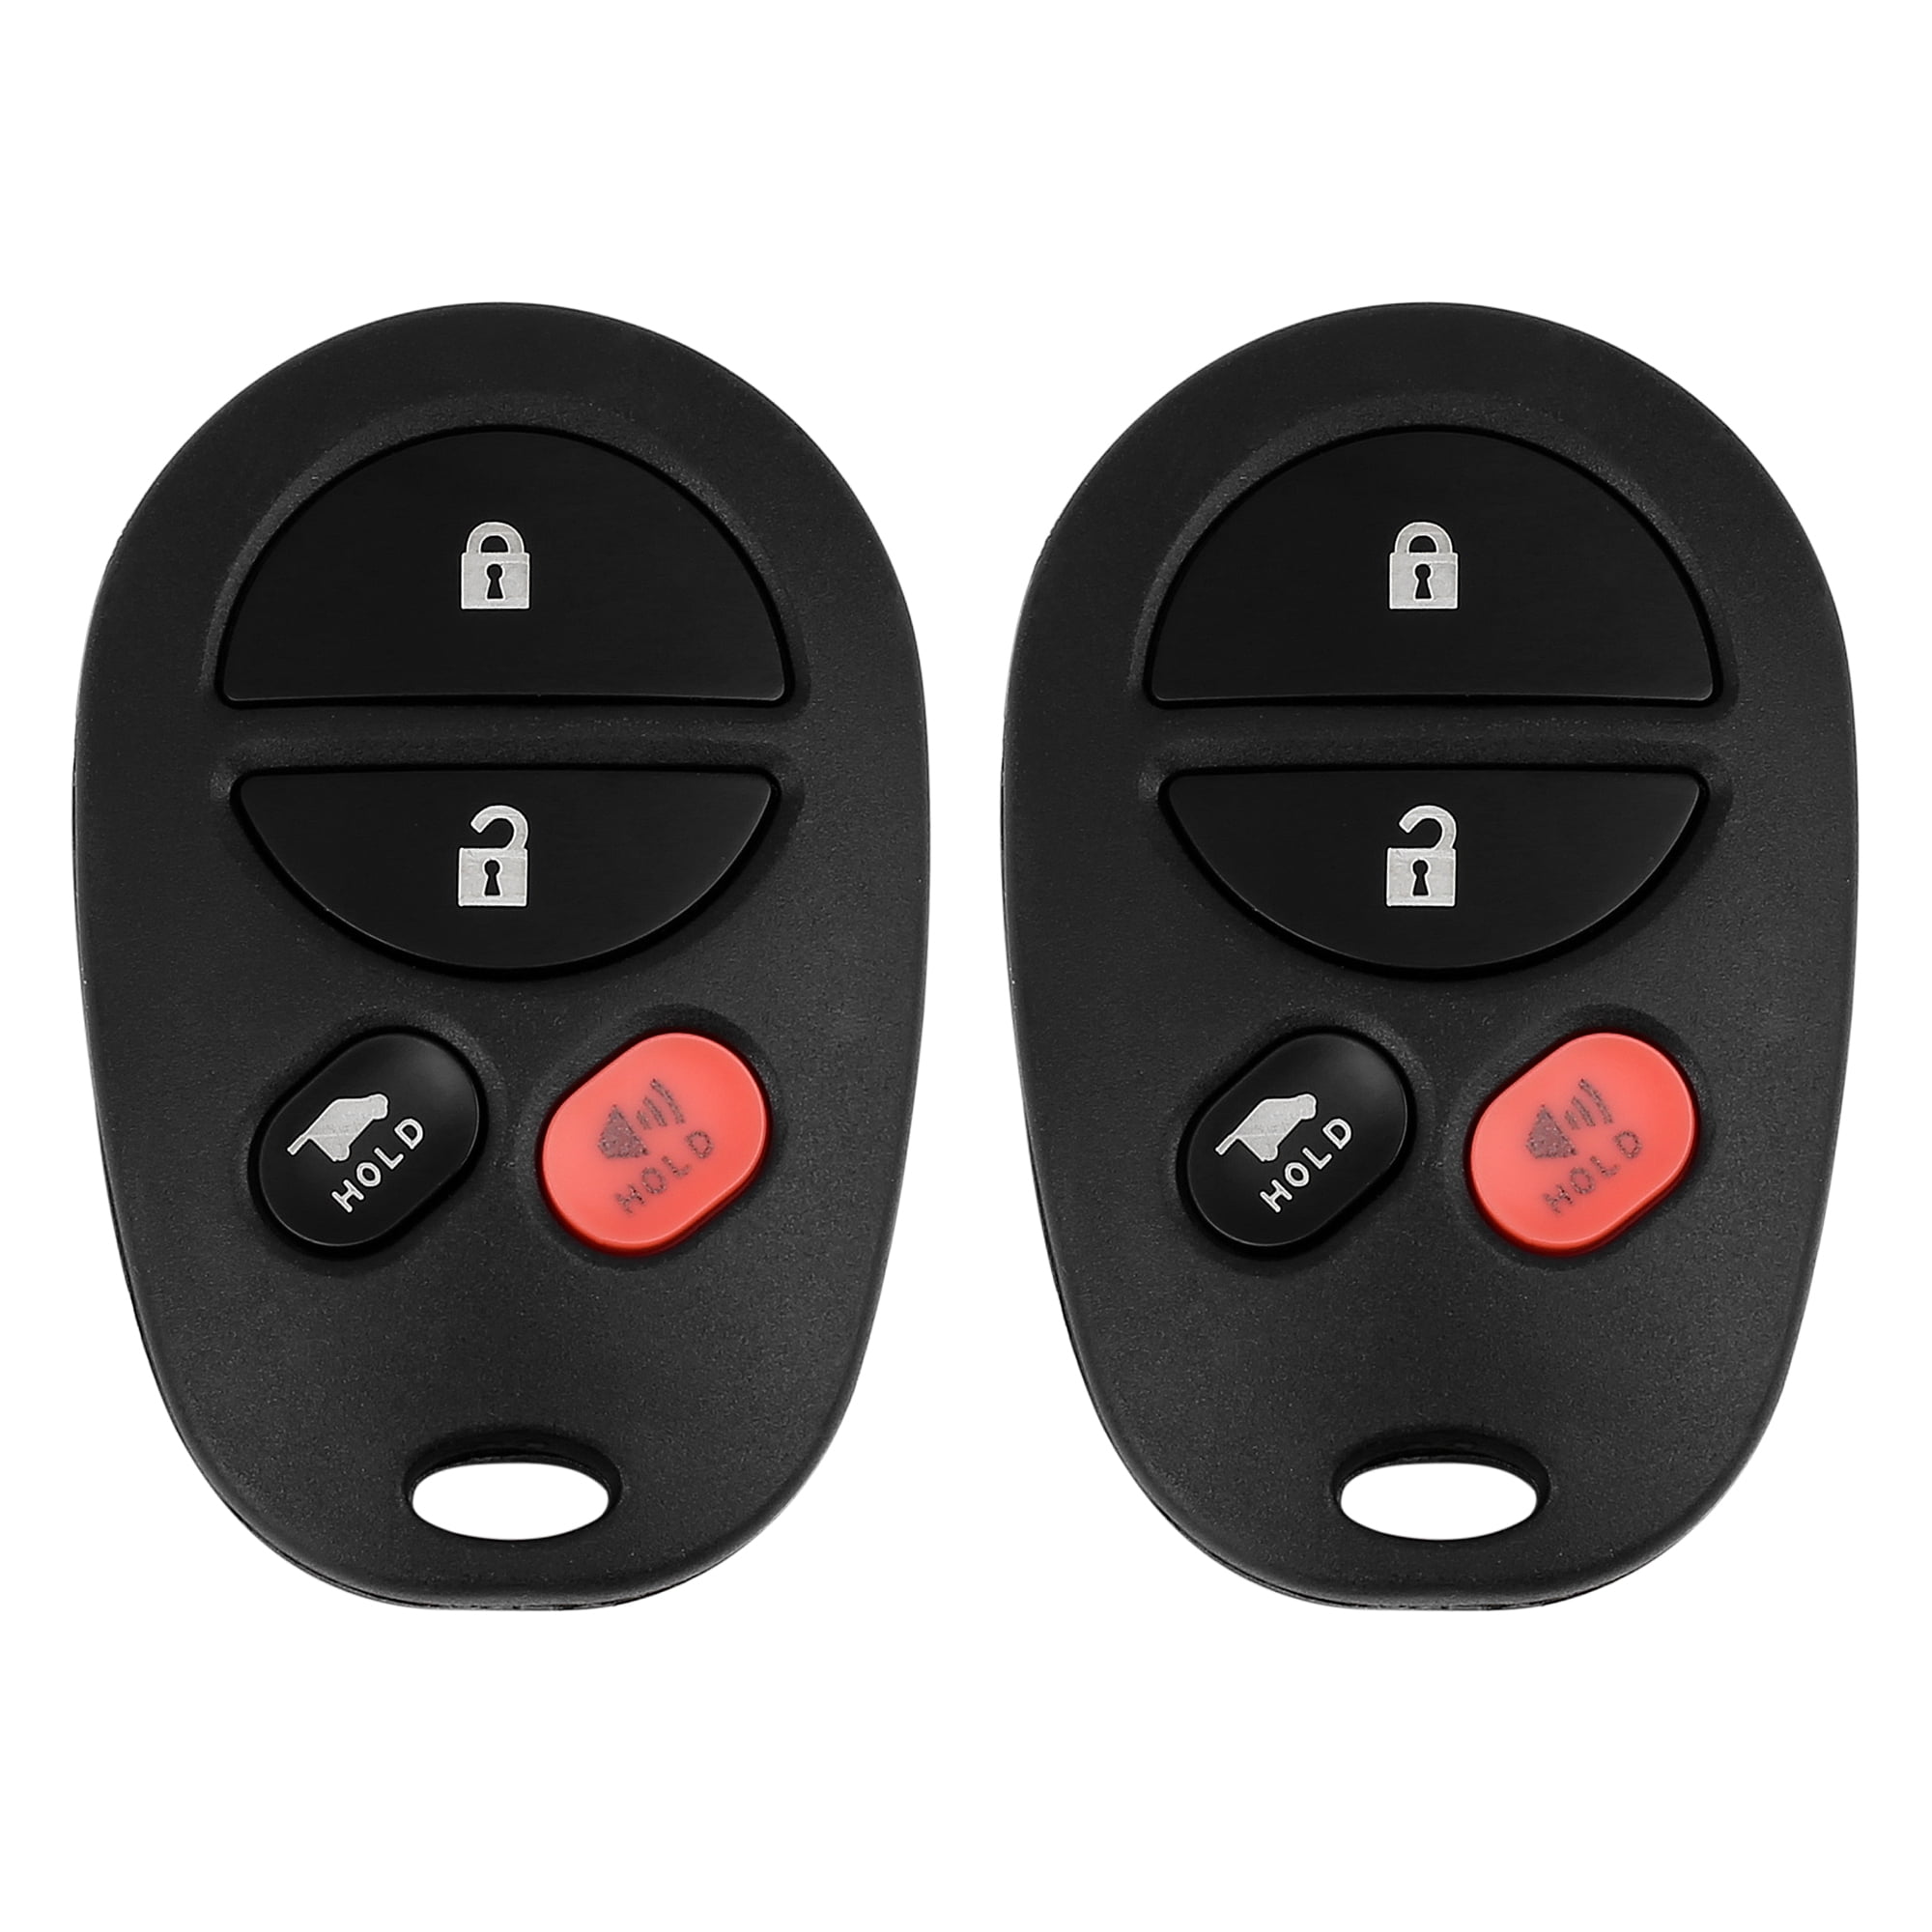 New Keyless Entry Remote Key Fob For a 2004 Toyota Sienna w/ 6 Buttons 